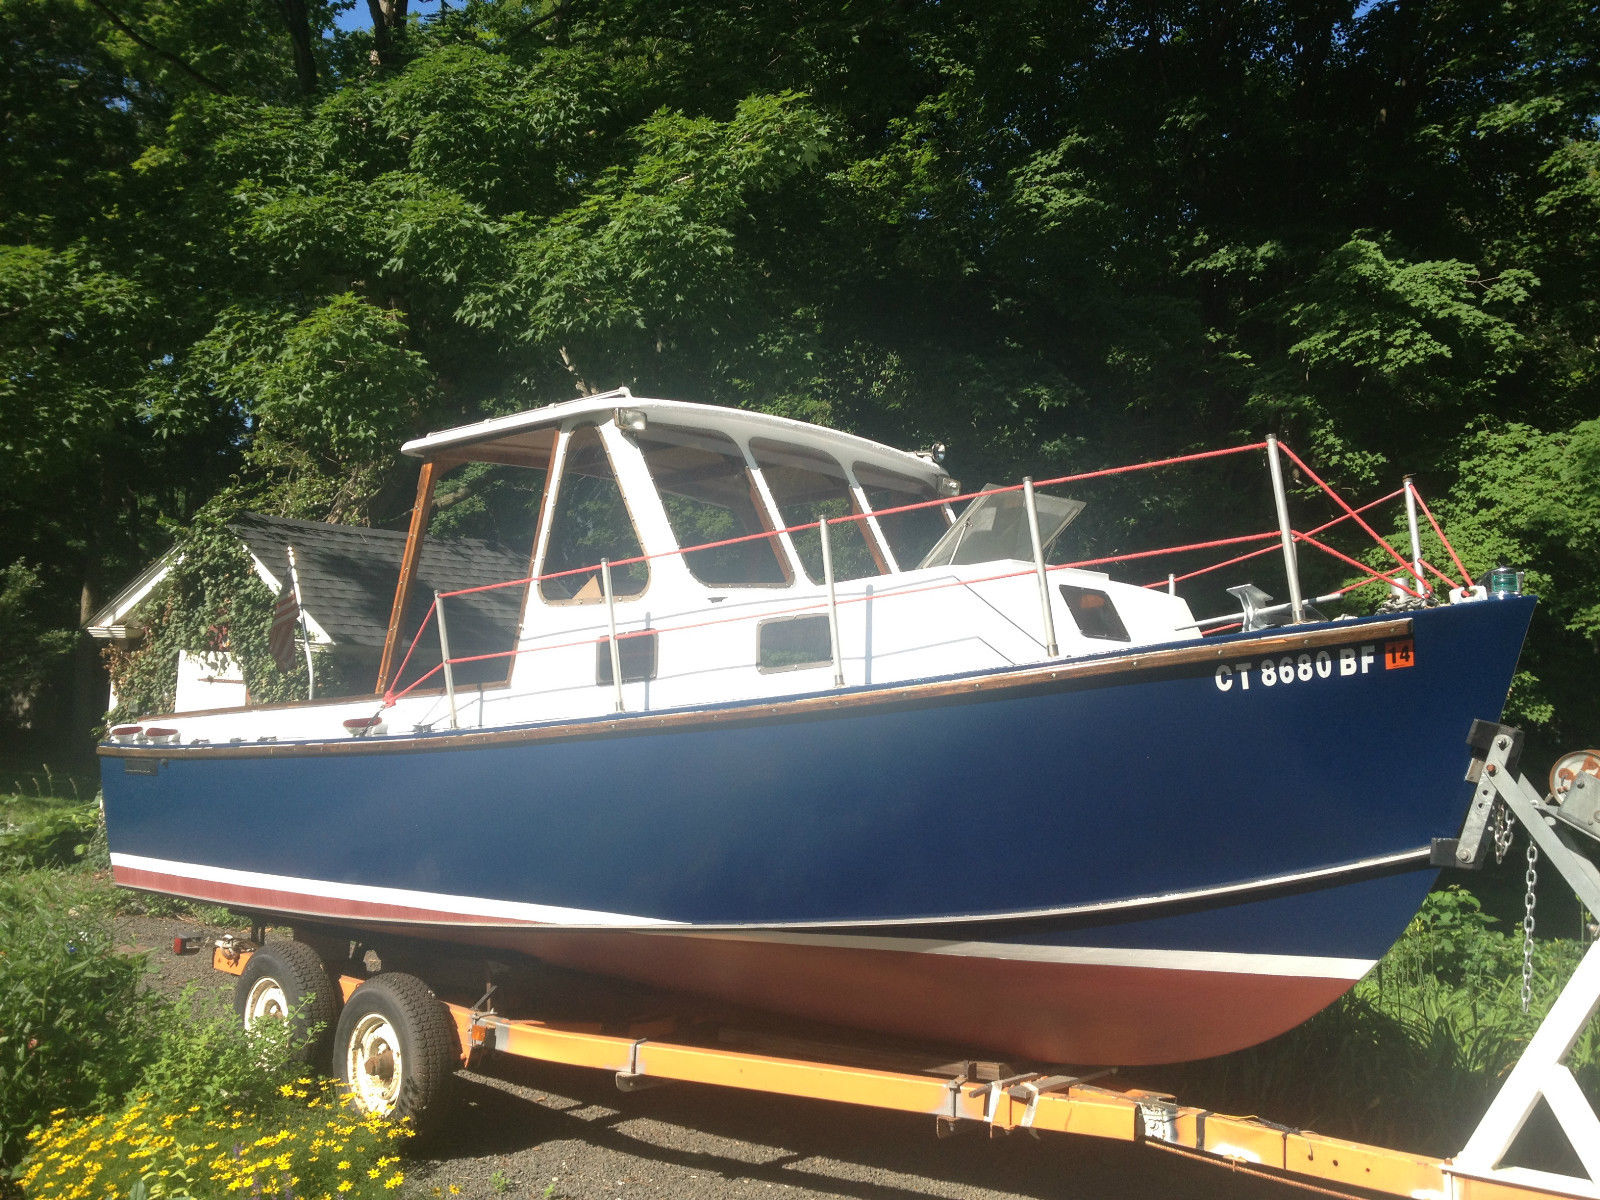 Glen L Double Eagle 1998 for sale for $7,500 - Boats-from ...